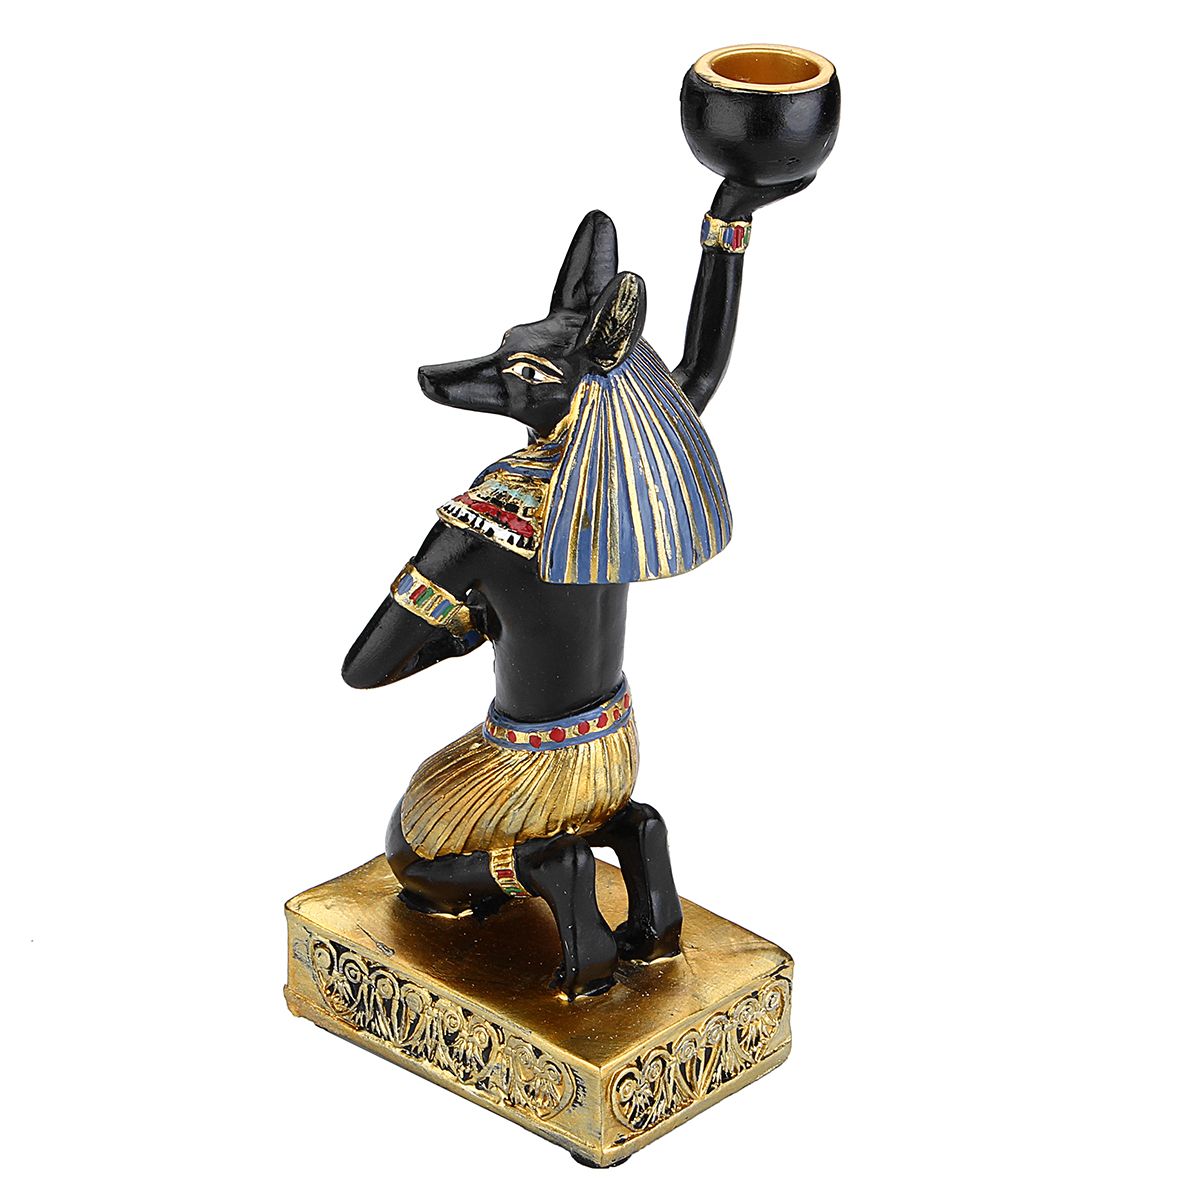 Resin-Egyptian-Figurine-Candle-Holder-Anubis-Vintage-Statue-Craft-Home-Decorations-Gift-1363732